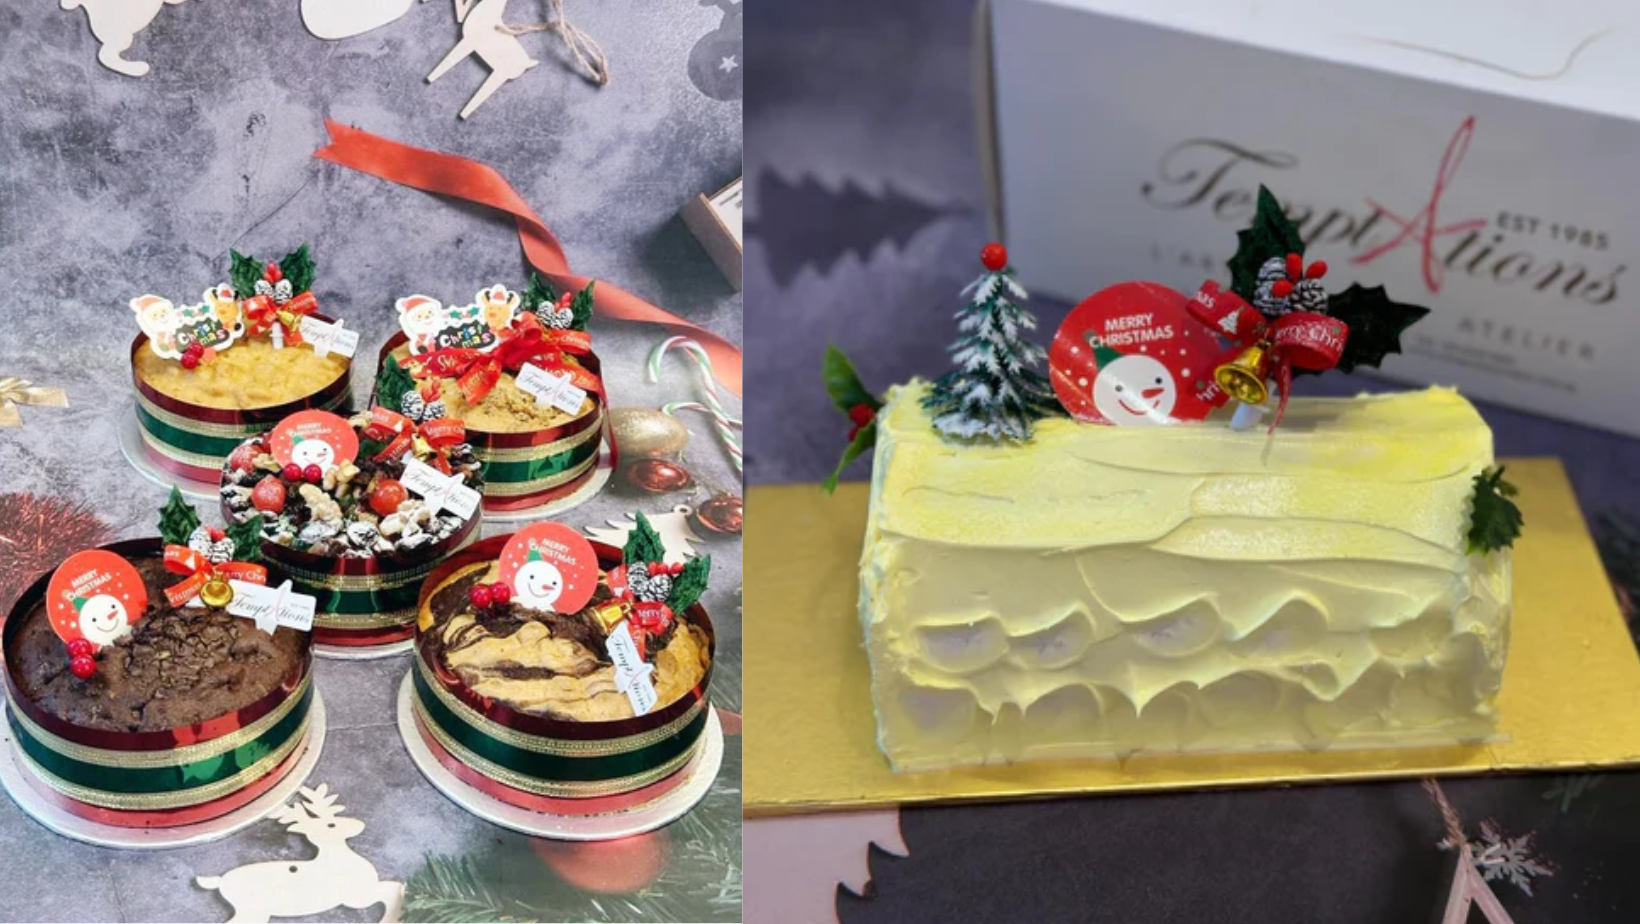 Christmas in Singapore: A Culinary Journey Through the City's Finest Christmas Cakes